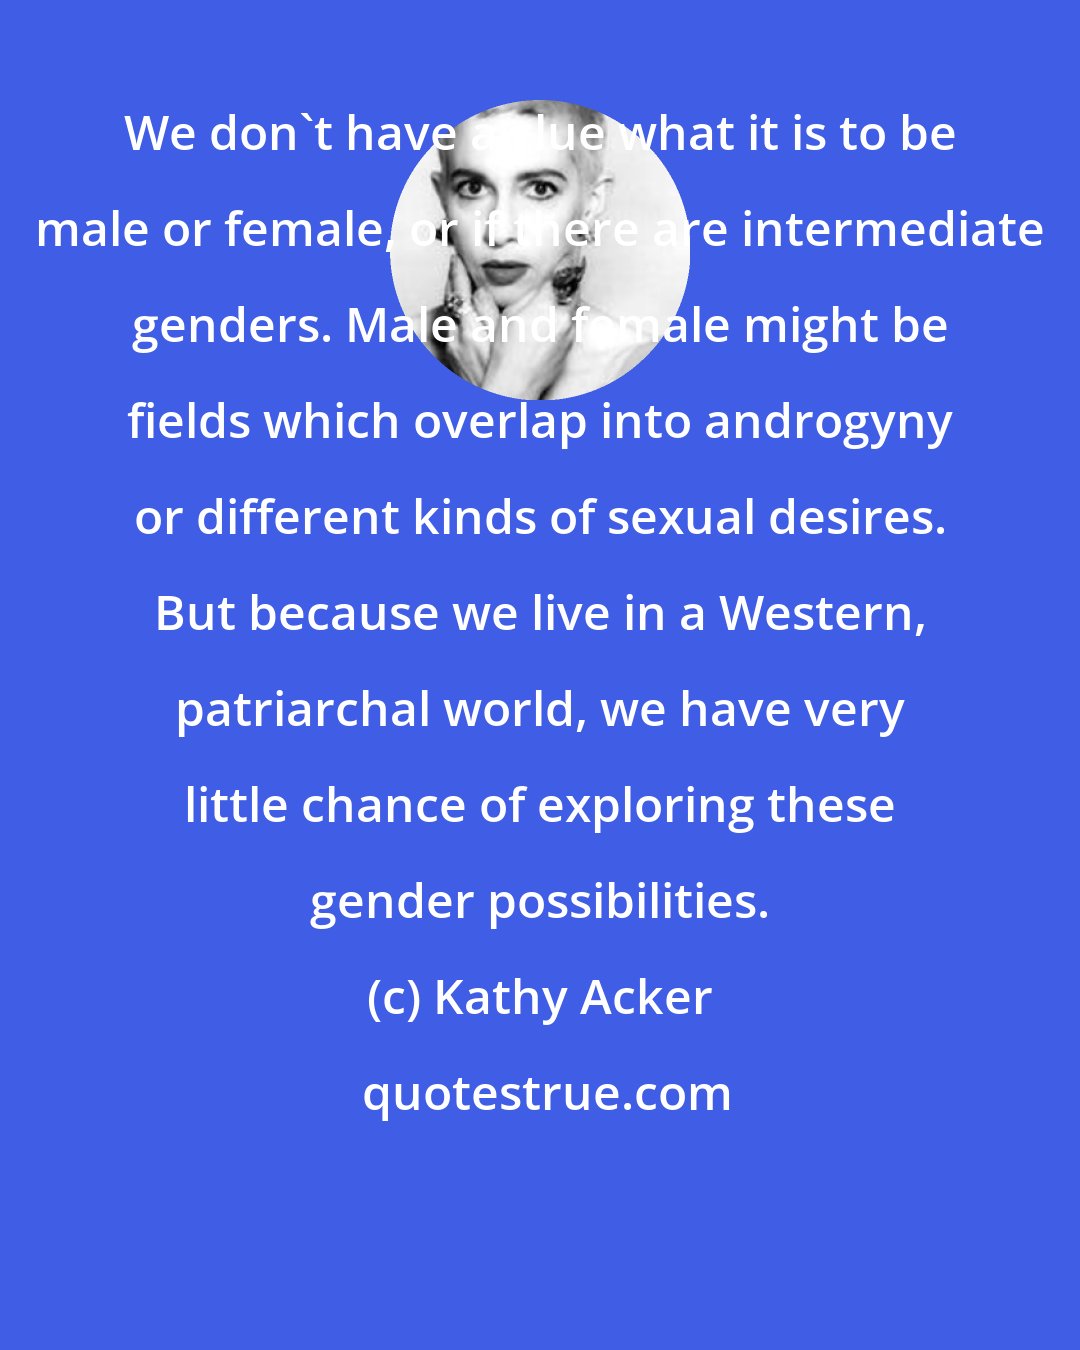 Kathy Acker: We don't have a clue what it is to be male or female, or if there are intermediate genders. Male and female might be fields which overlap into androgyny or different kinds of sexual desires. But because we live in a Western, patriarchal world, we have very little chance of exploring these gender possibilities.